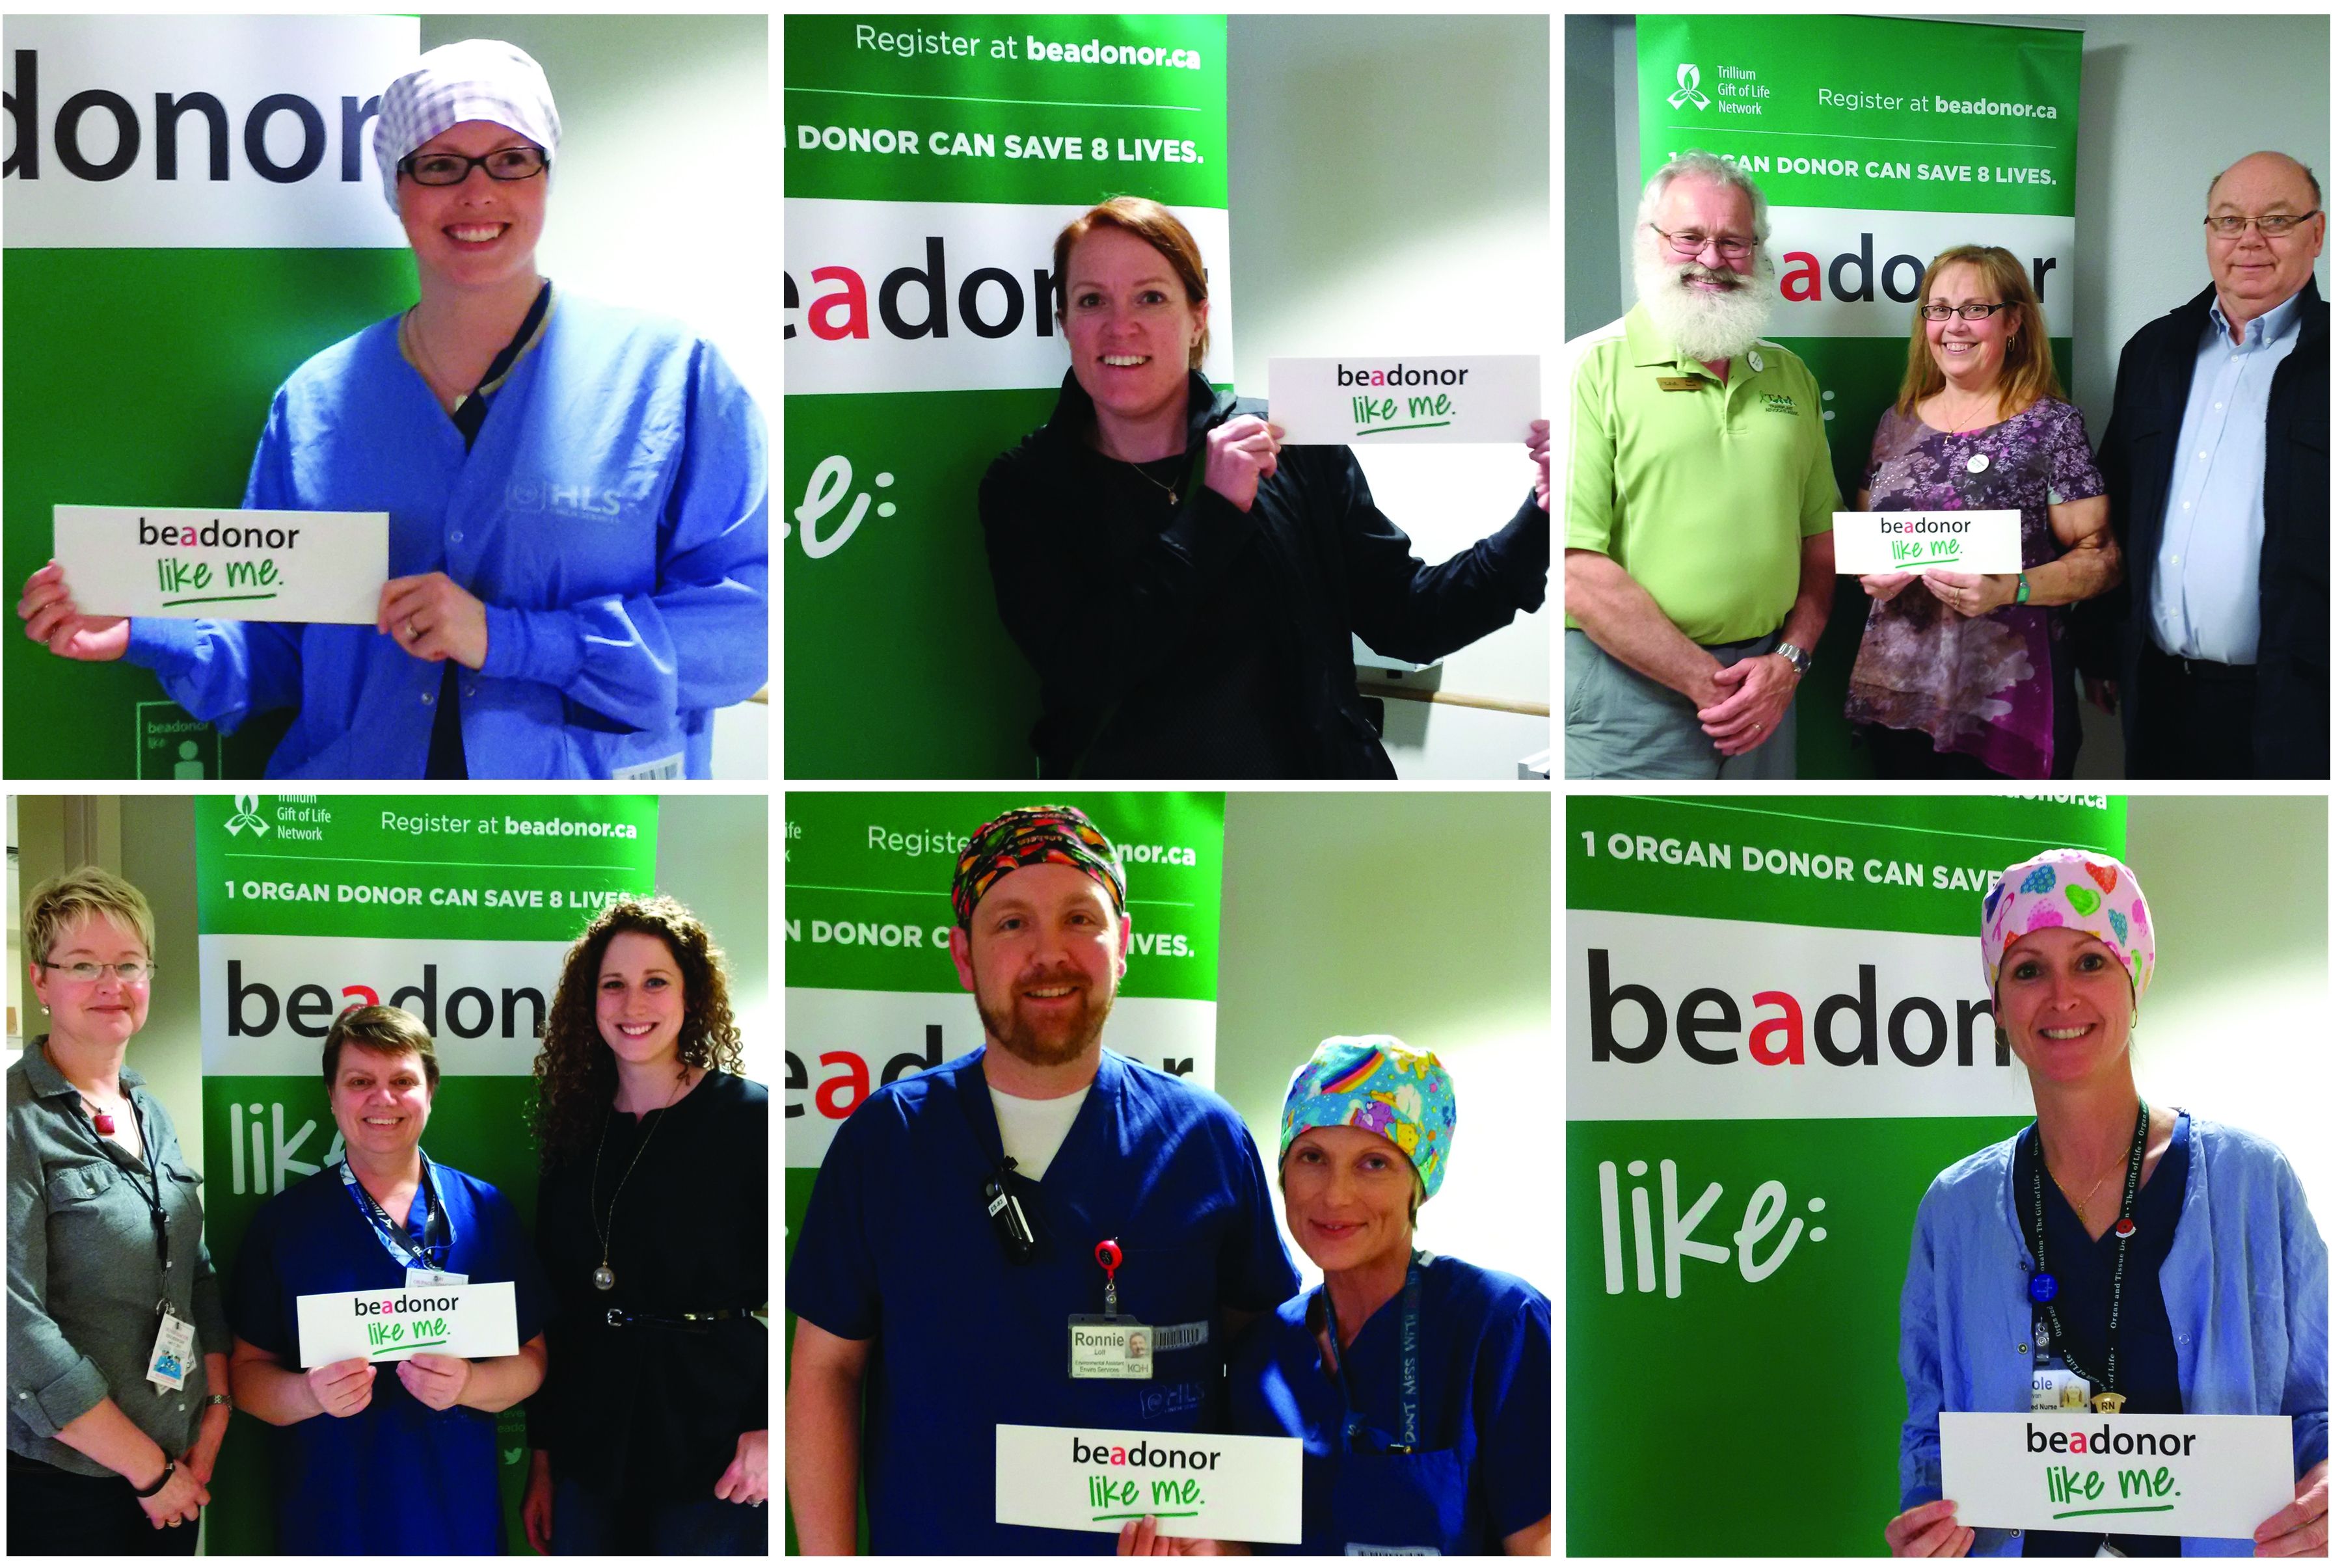 Share it on social media. Staff from across the hospital have been stopping to have their pictures snapped with the beadonor banner in the Atrium.